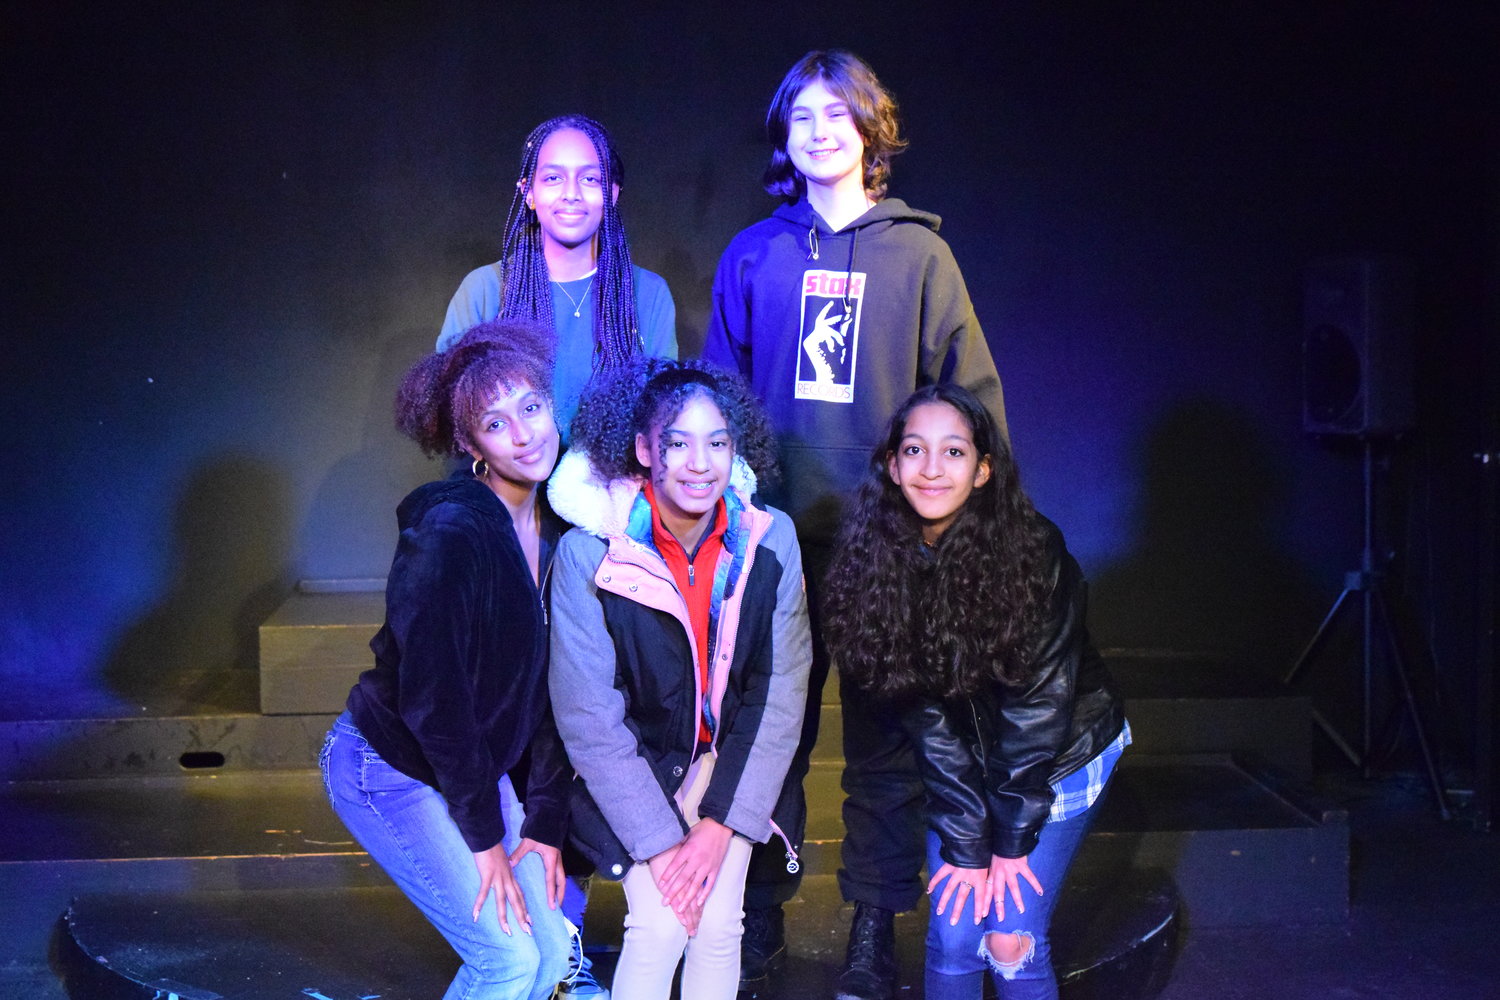 “Inspired” cast members (back row, left to right) Layla Nerayo, Luka McIlrath, (front row) Amele Brown, Sha’Vontie Juneau and Ava O’Neal. (Photo by Jill Boogren)